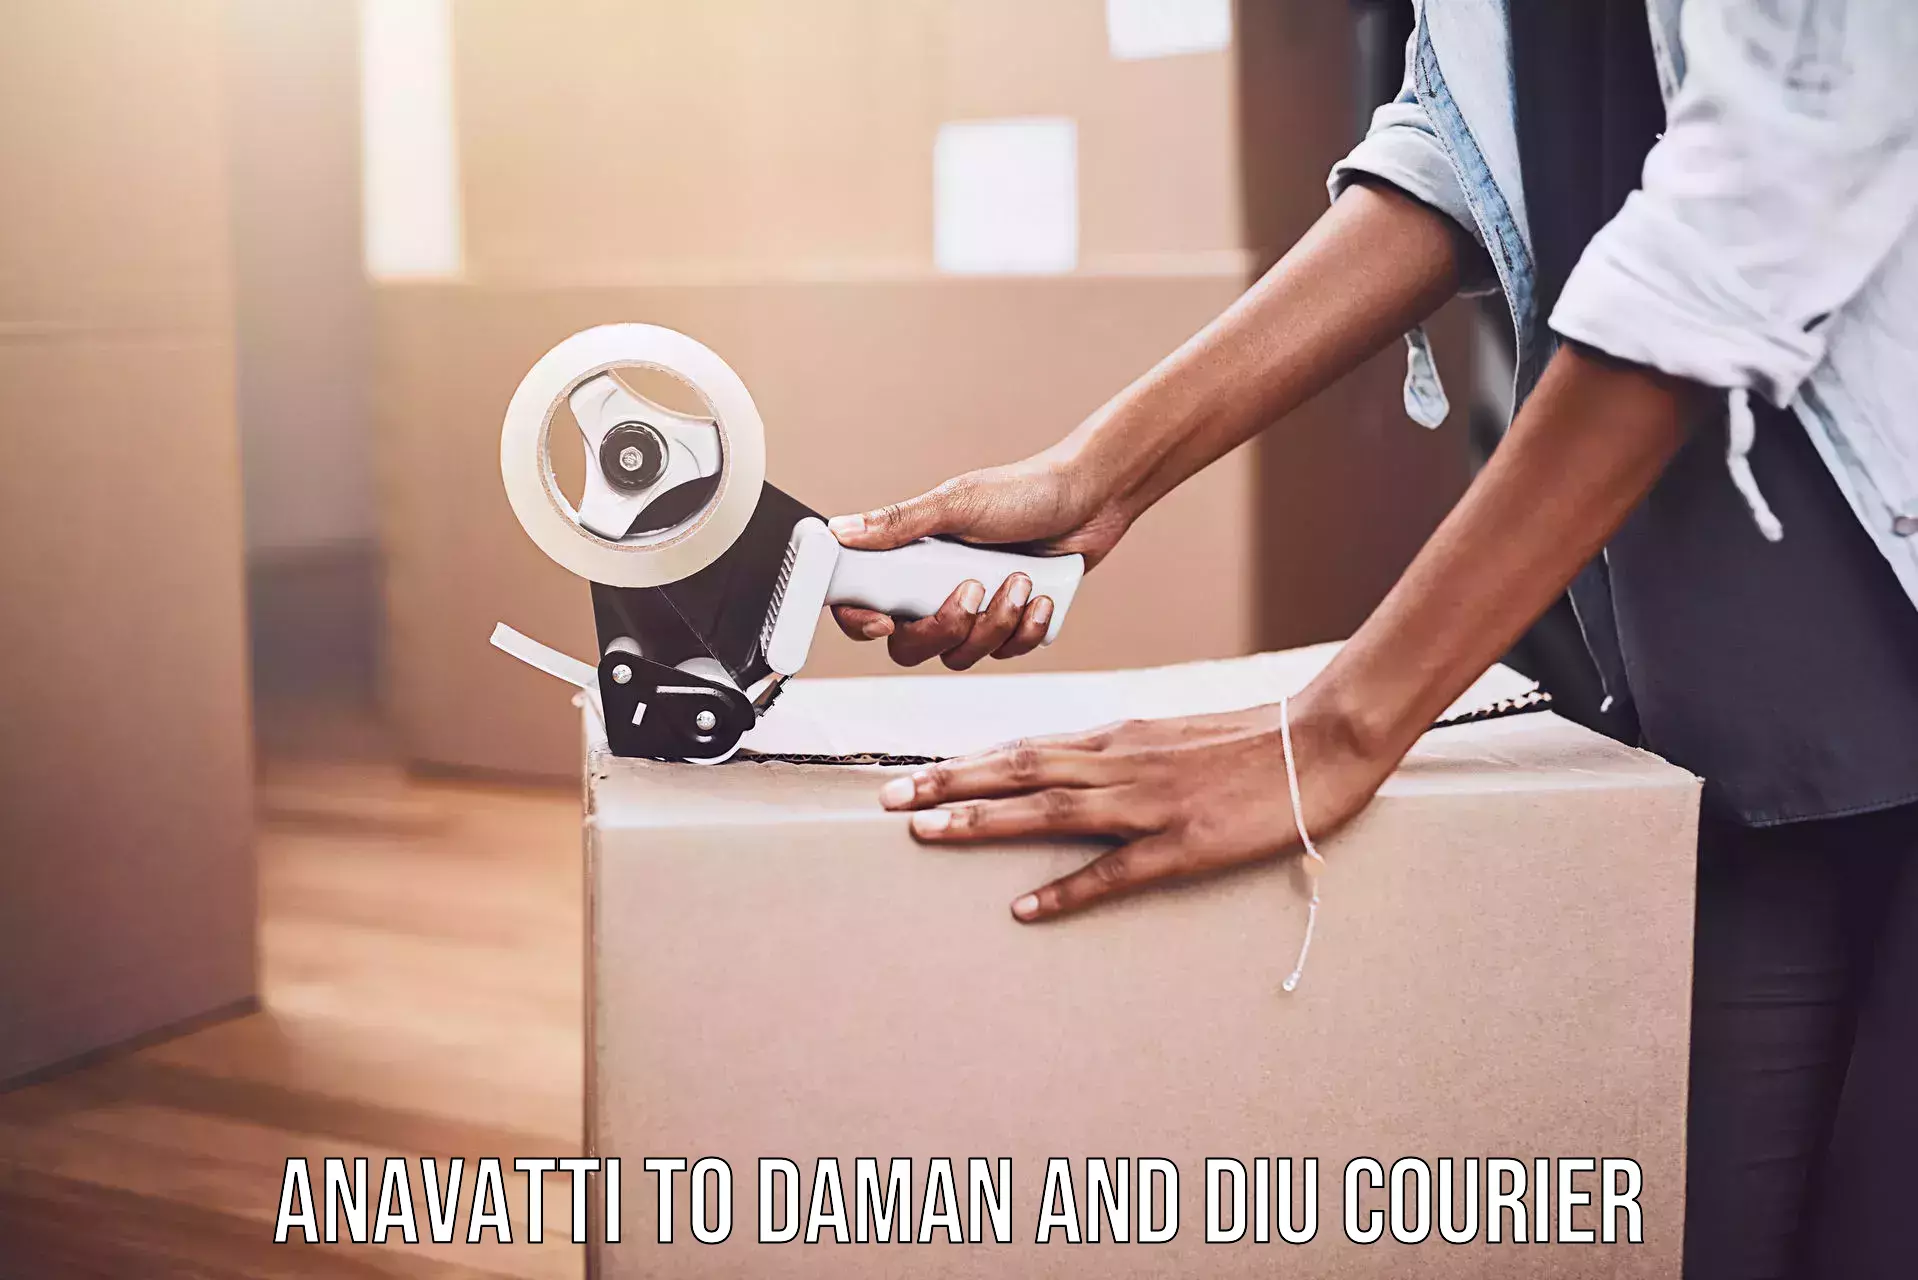 Express delivery capabilities Anavatti to Daman and Diu